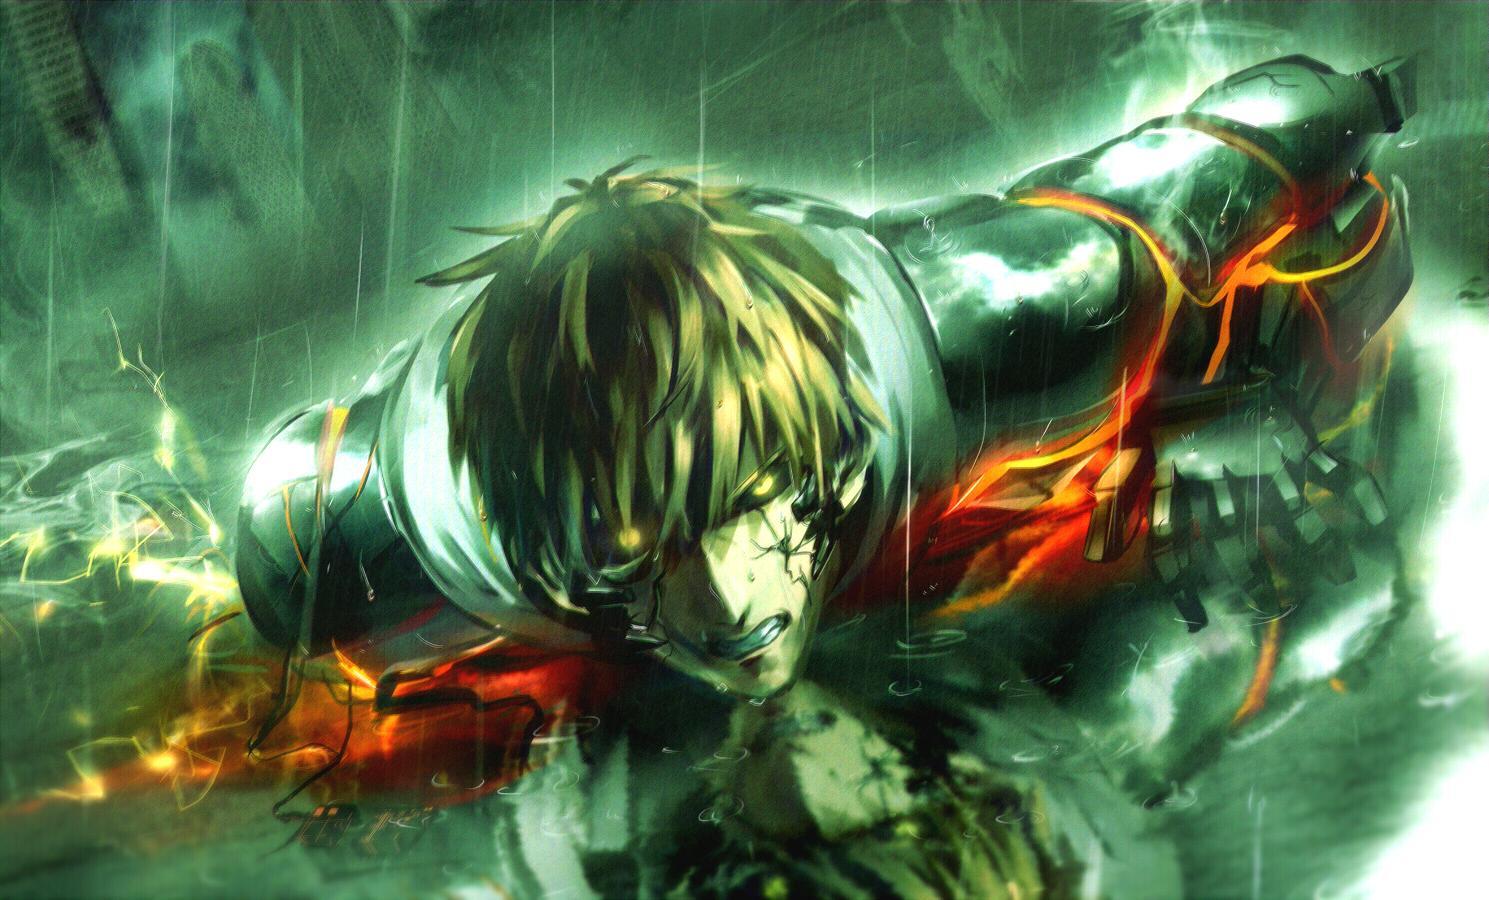 Genos (One Punch Man) Anime Image Board